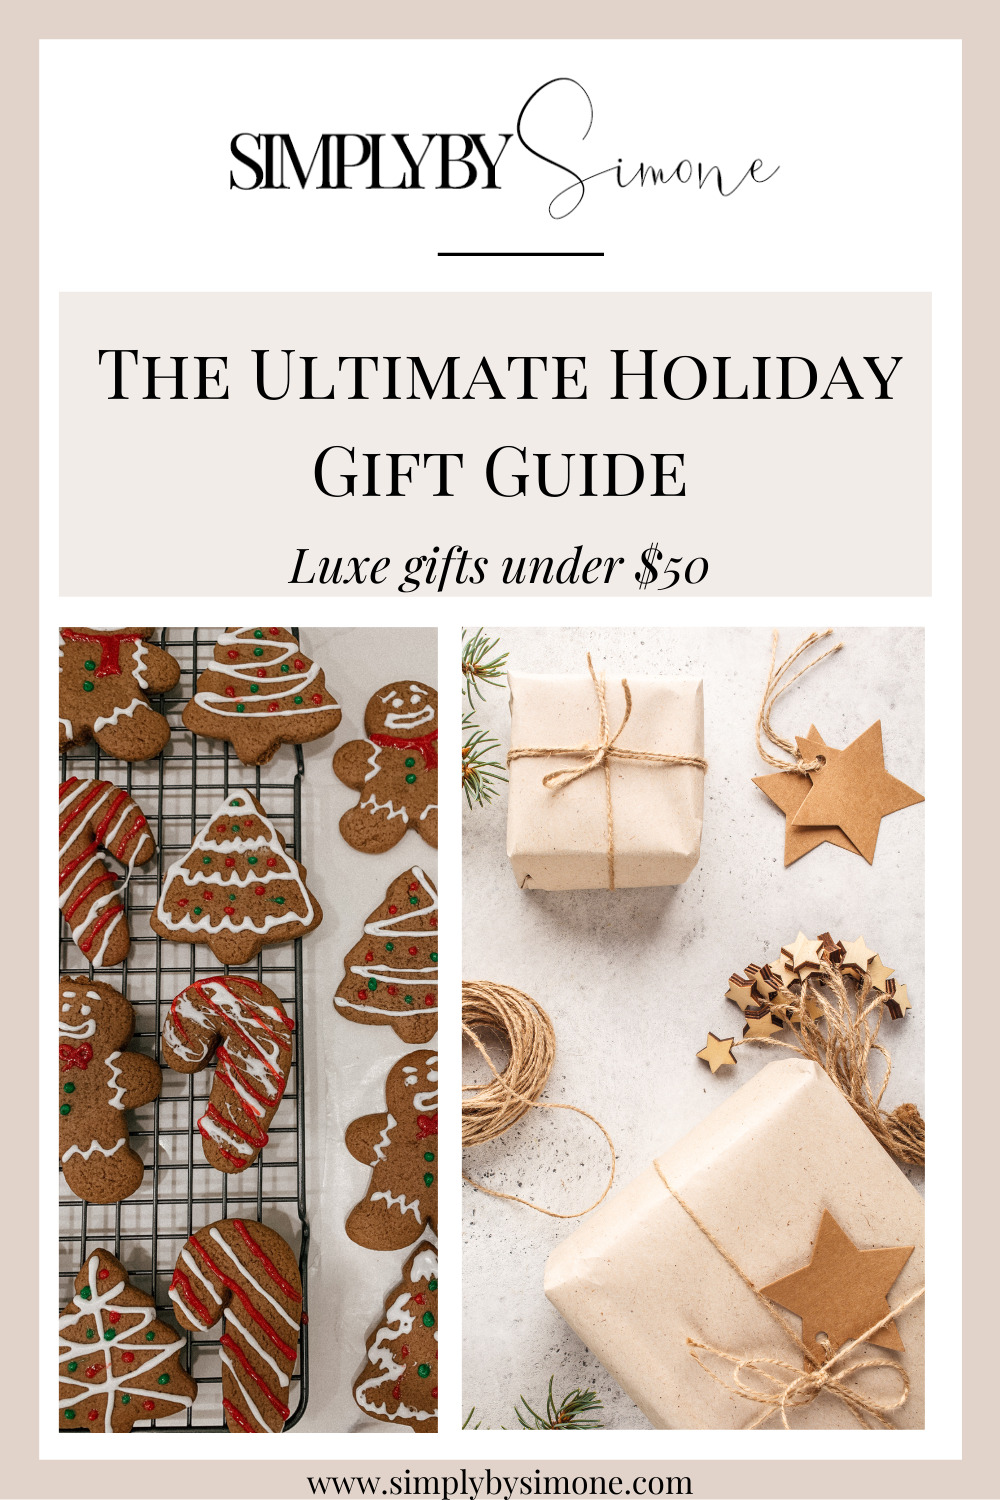 Gifts For Her: Under $50 - Blushing Rose Style Blog